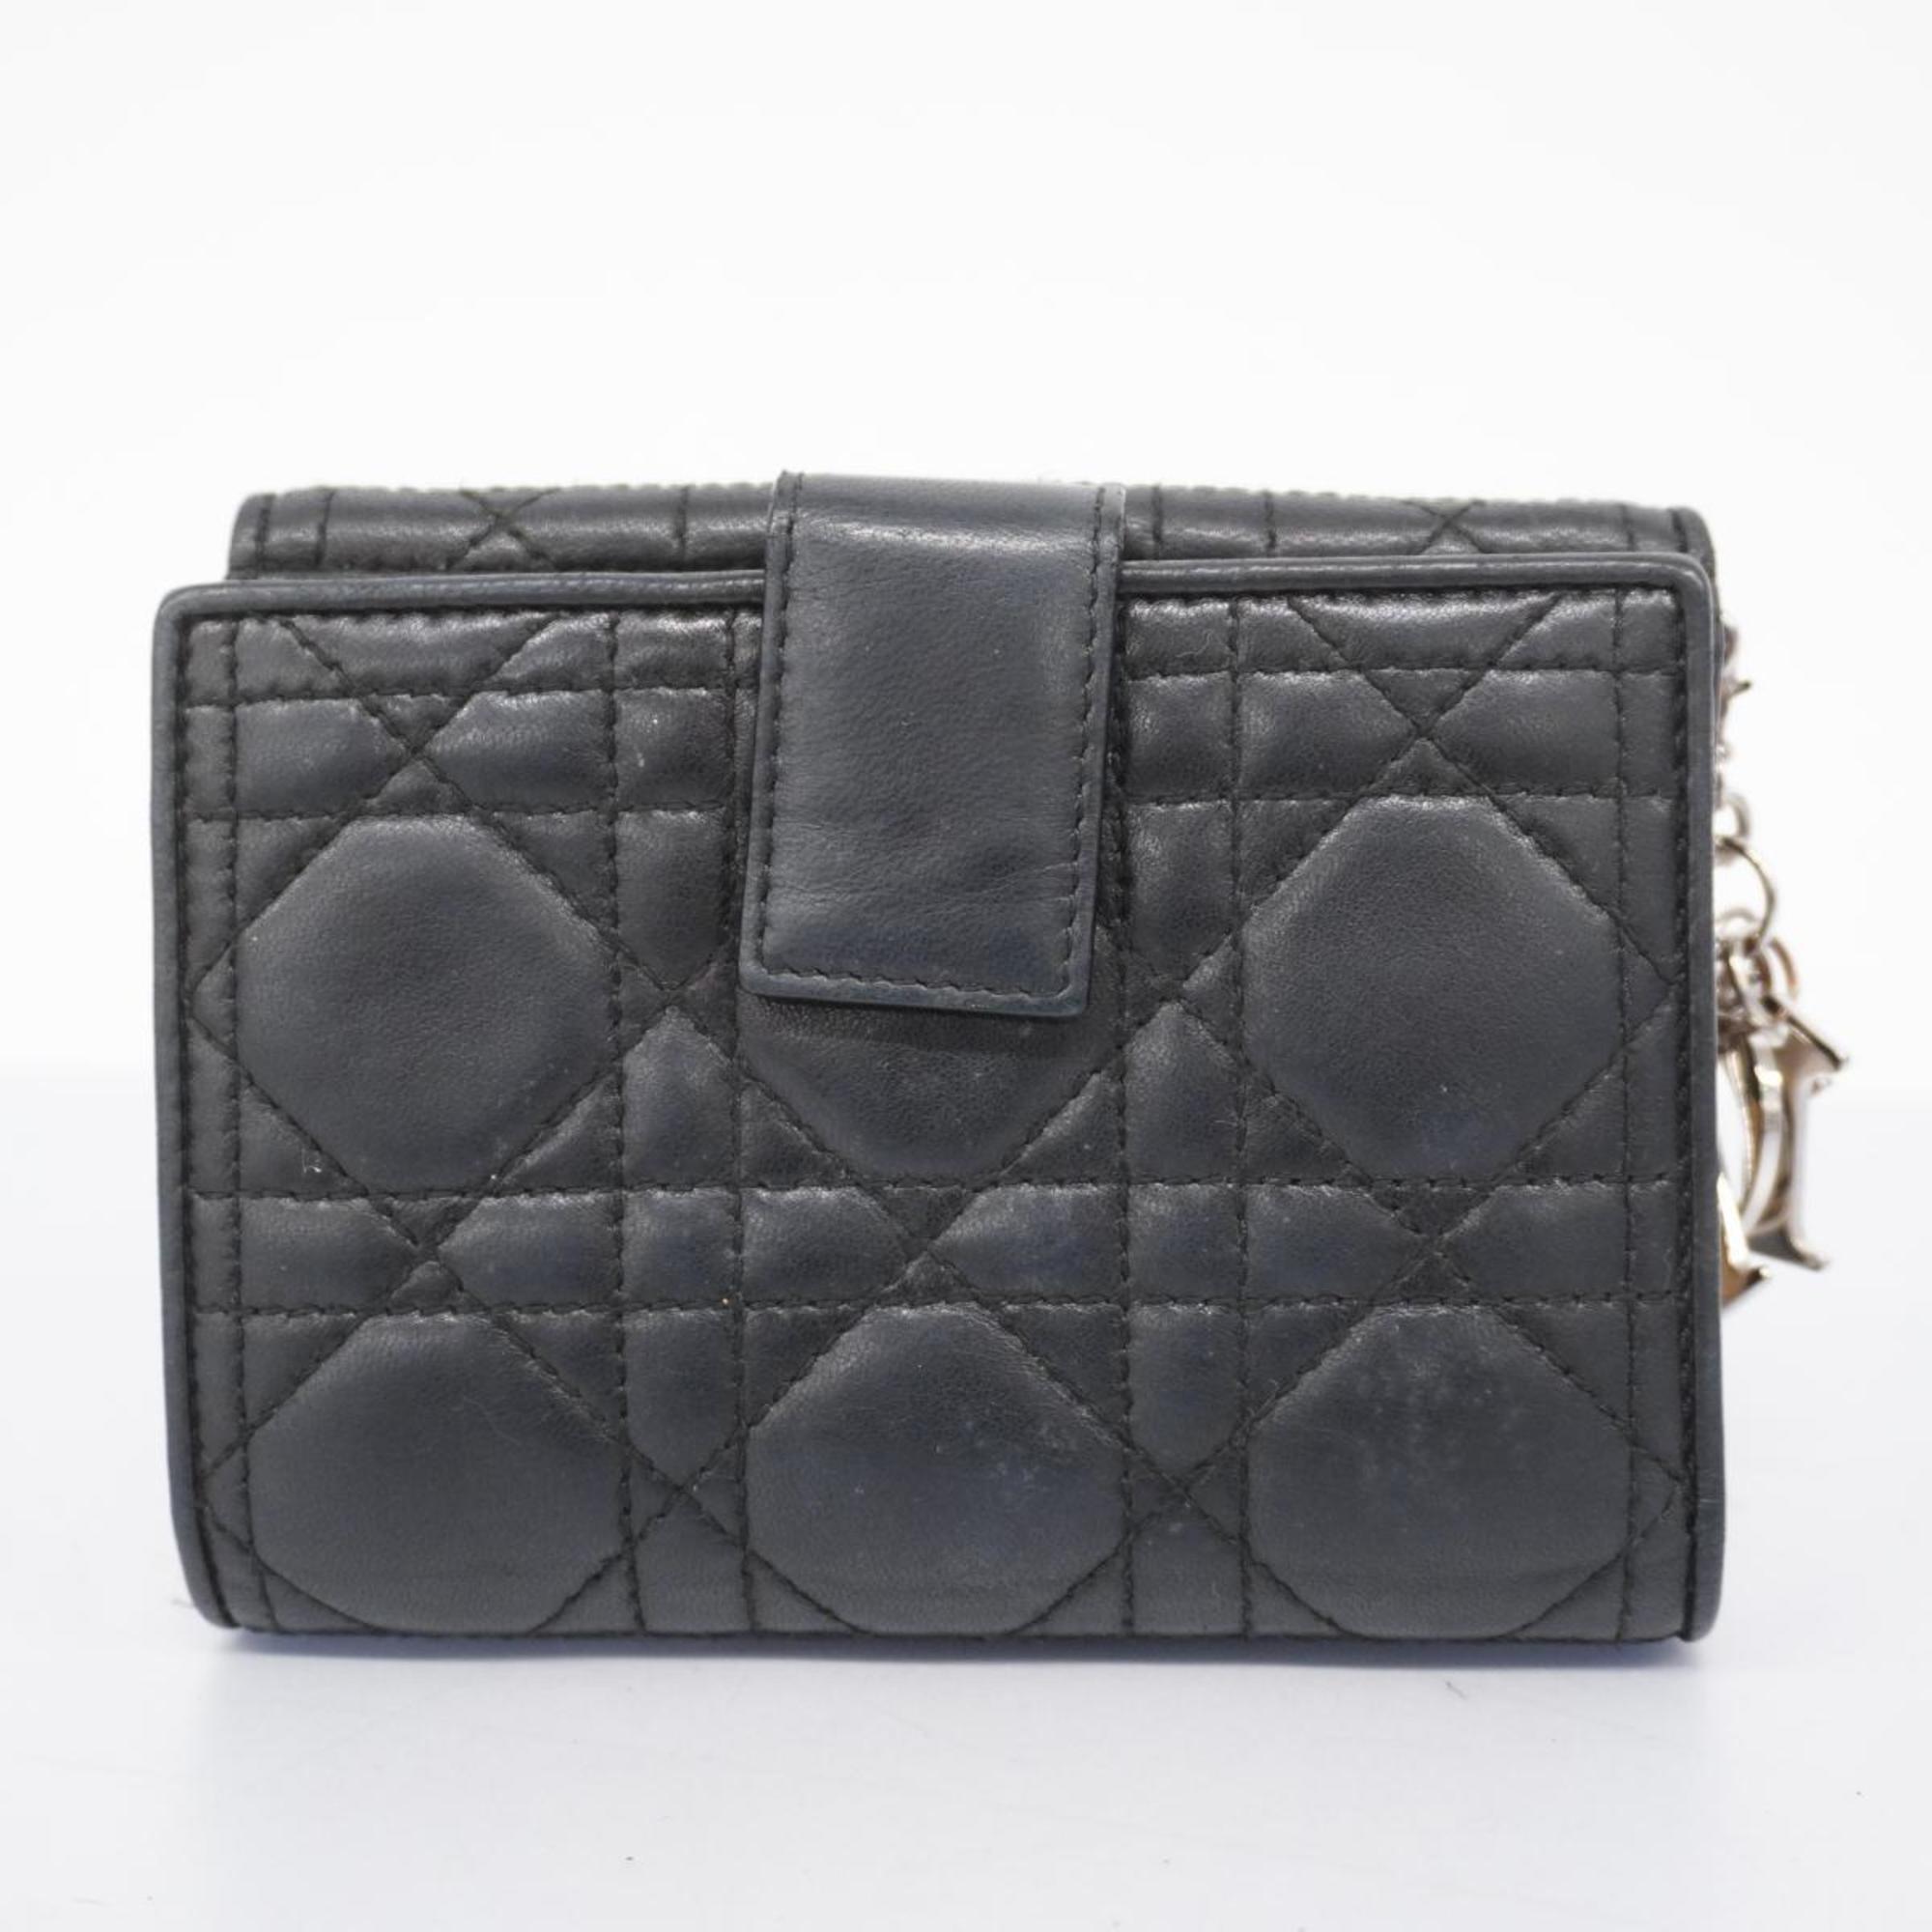 Christian Dior Wallet Cannage Leather Black Women's